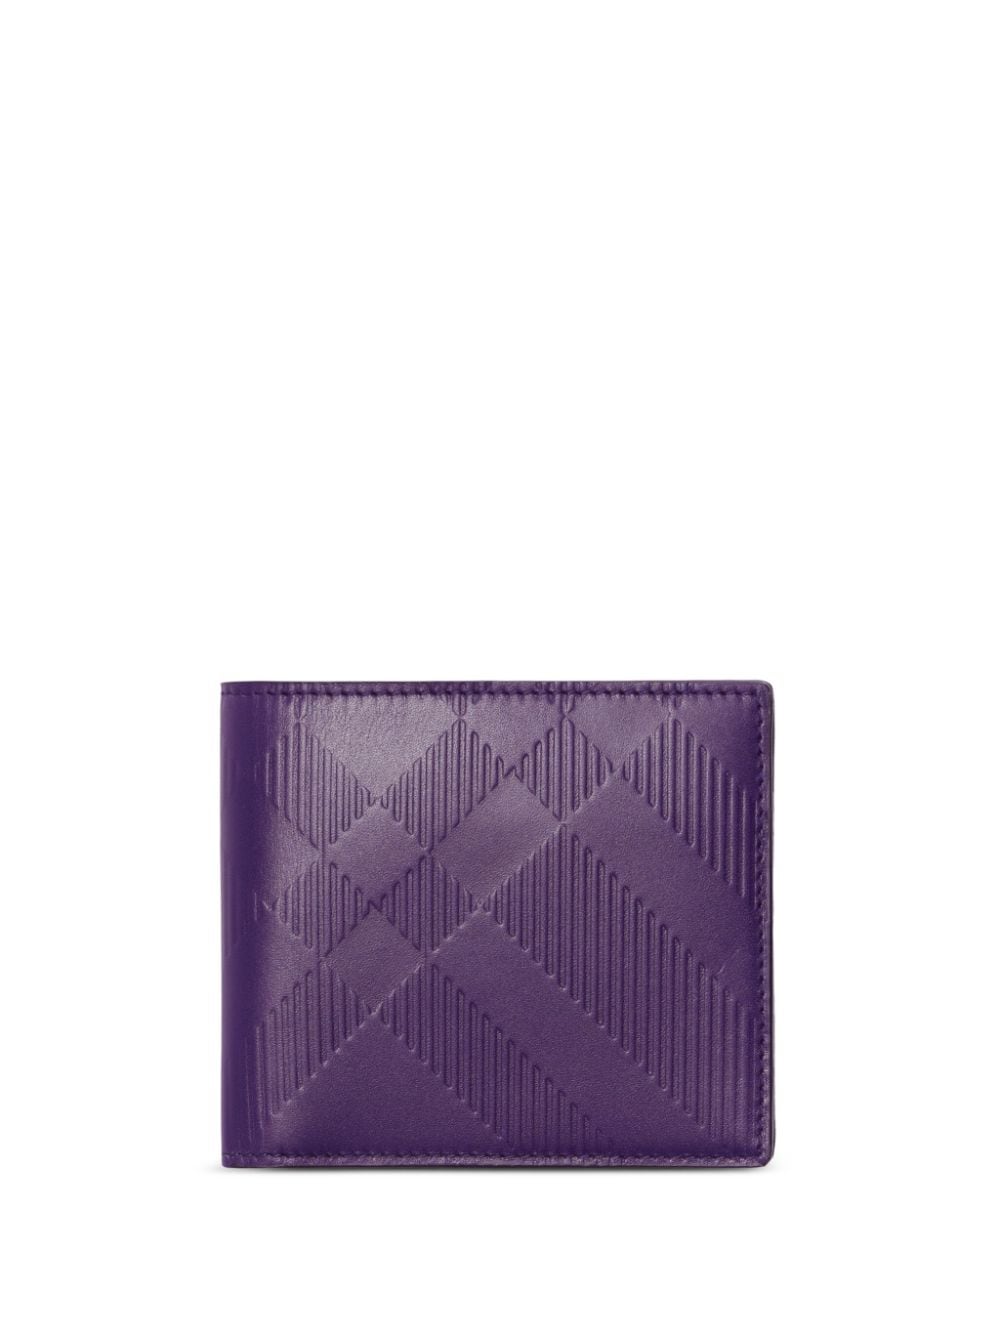 Burberry embossed-check Leather Wallet - Farfetch